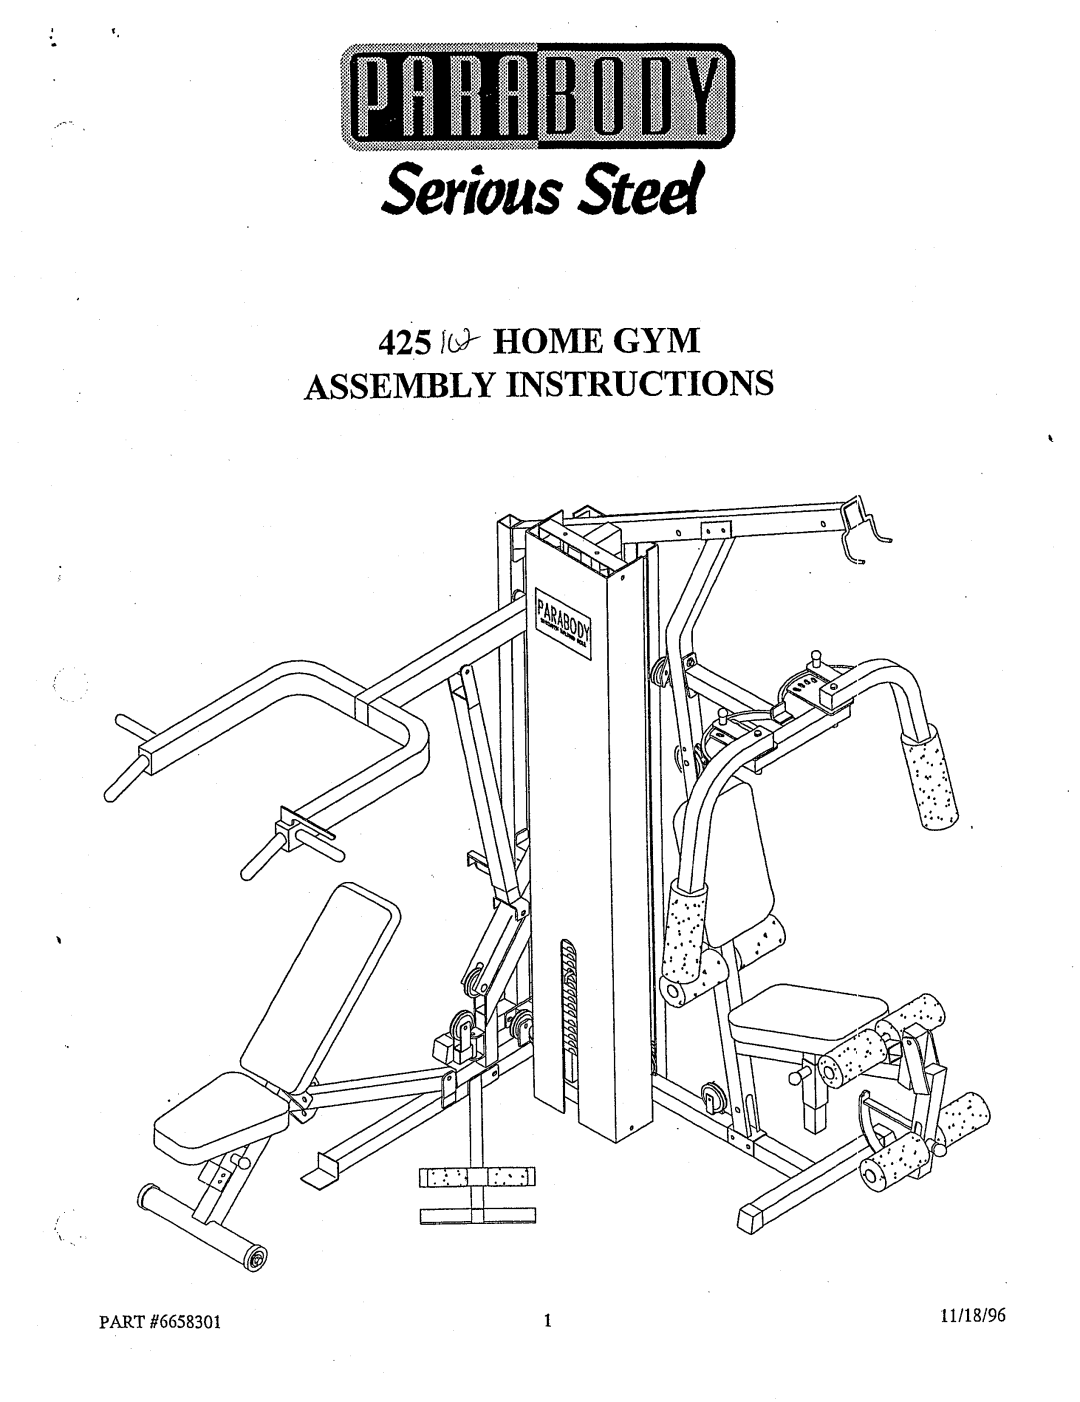 ParaBody manual PART#6658301, 11/18/96, SeriousSteel, 425 ~~9 ~ HOMEGYM ASSEMBLY INSTRUCTIONS 